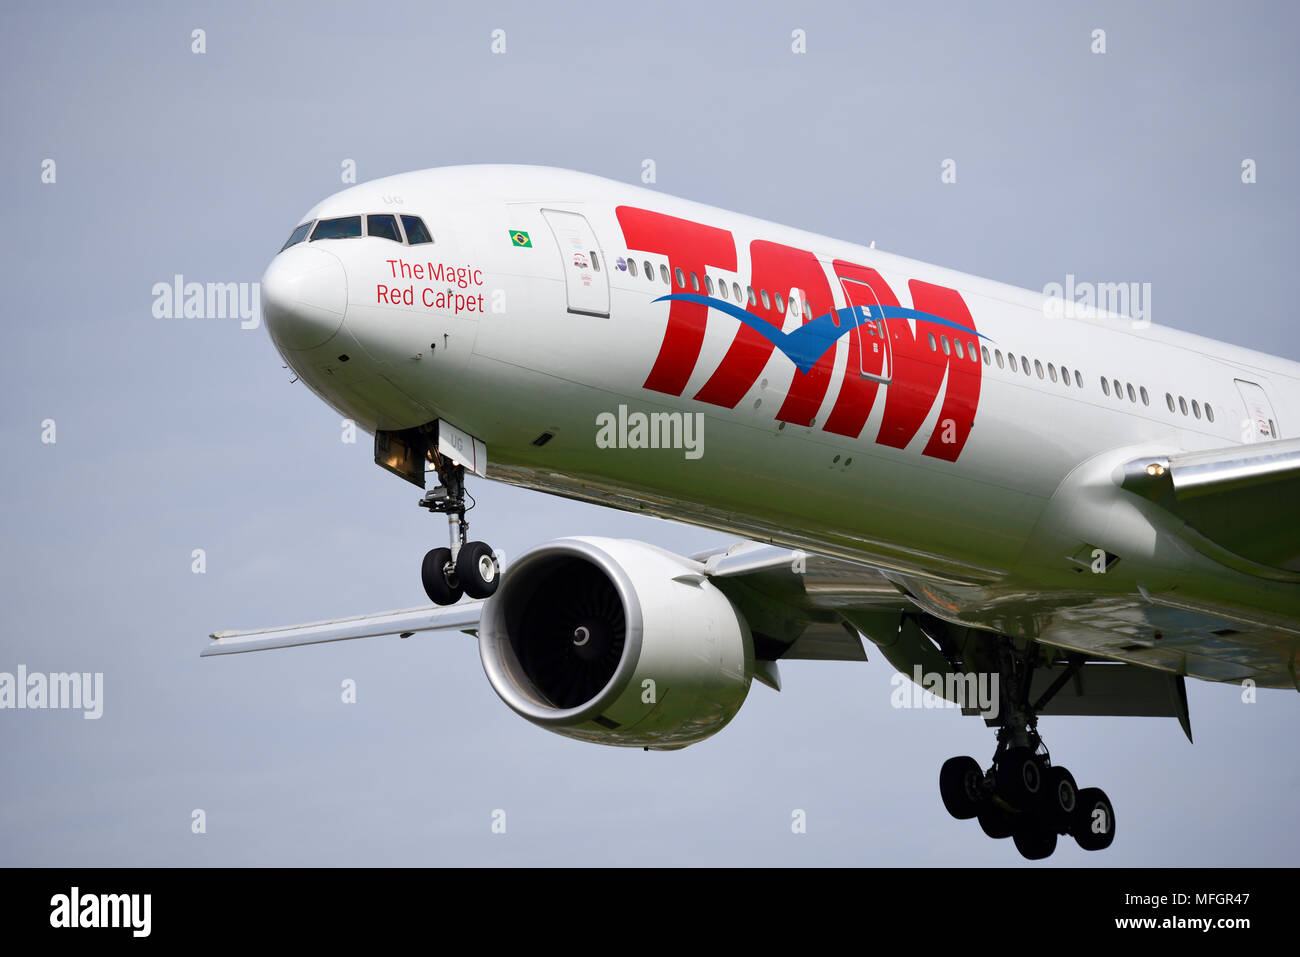 TAM Airlines is the Brazilian brand of LATAM Airlines Group. LATAM Boeing 777 PT-MUJ landing at London Heathrow Airport. The magic red carpet Stock Photo